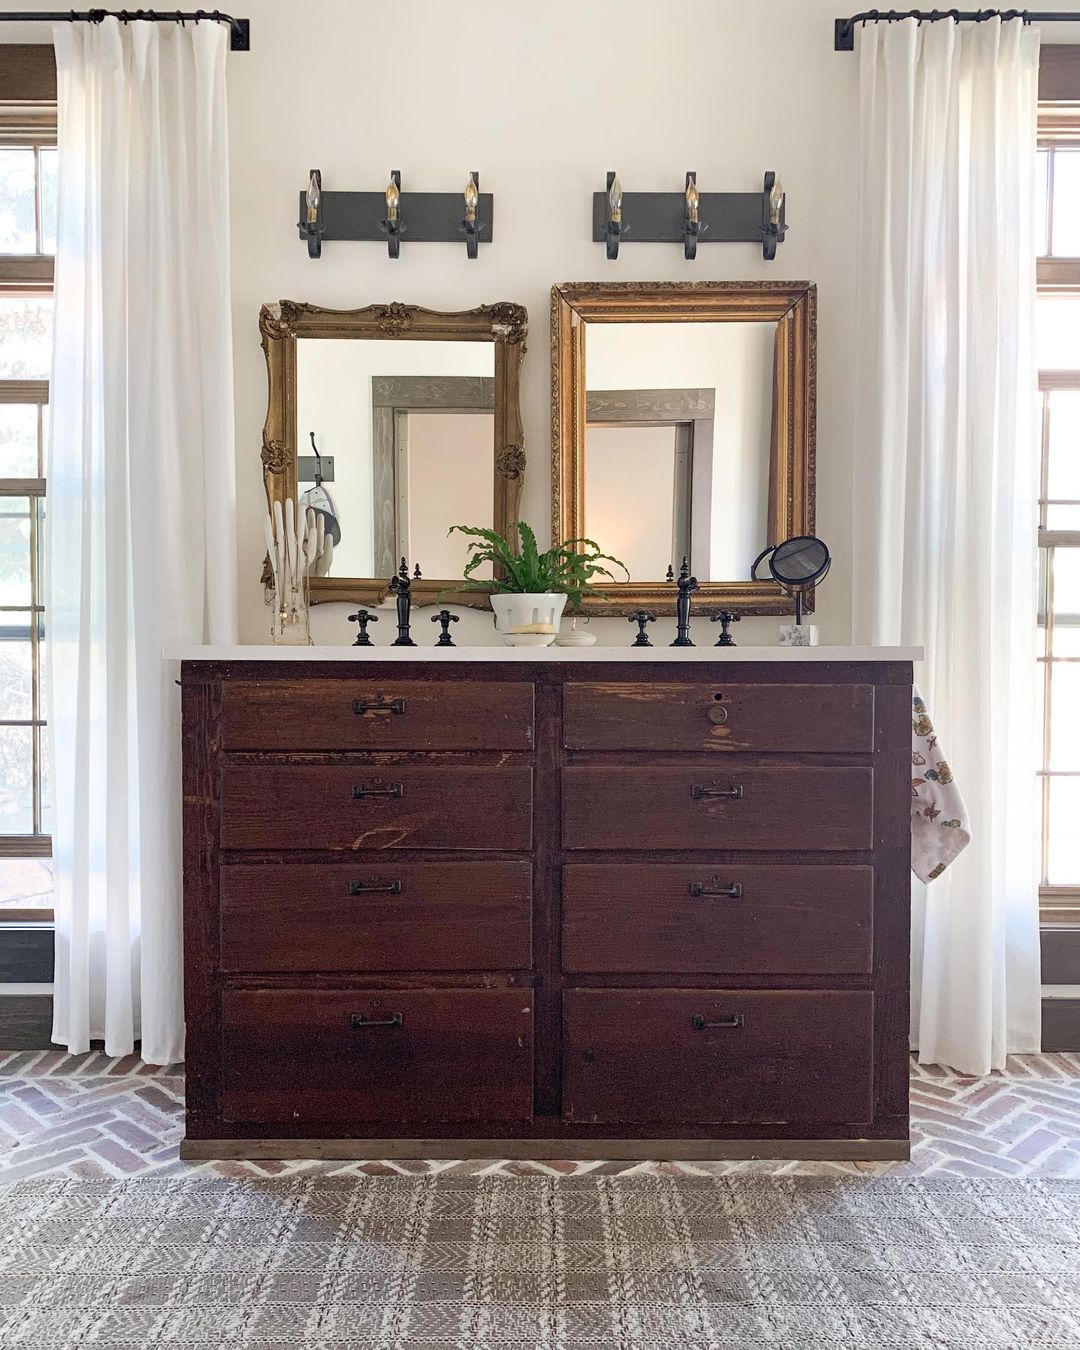 Old dresser repurposed into a double sink vanity. Photo by Instagram user @thecolonialfarmhouse